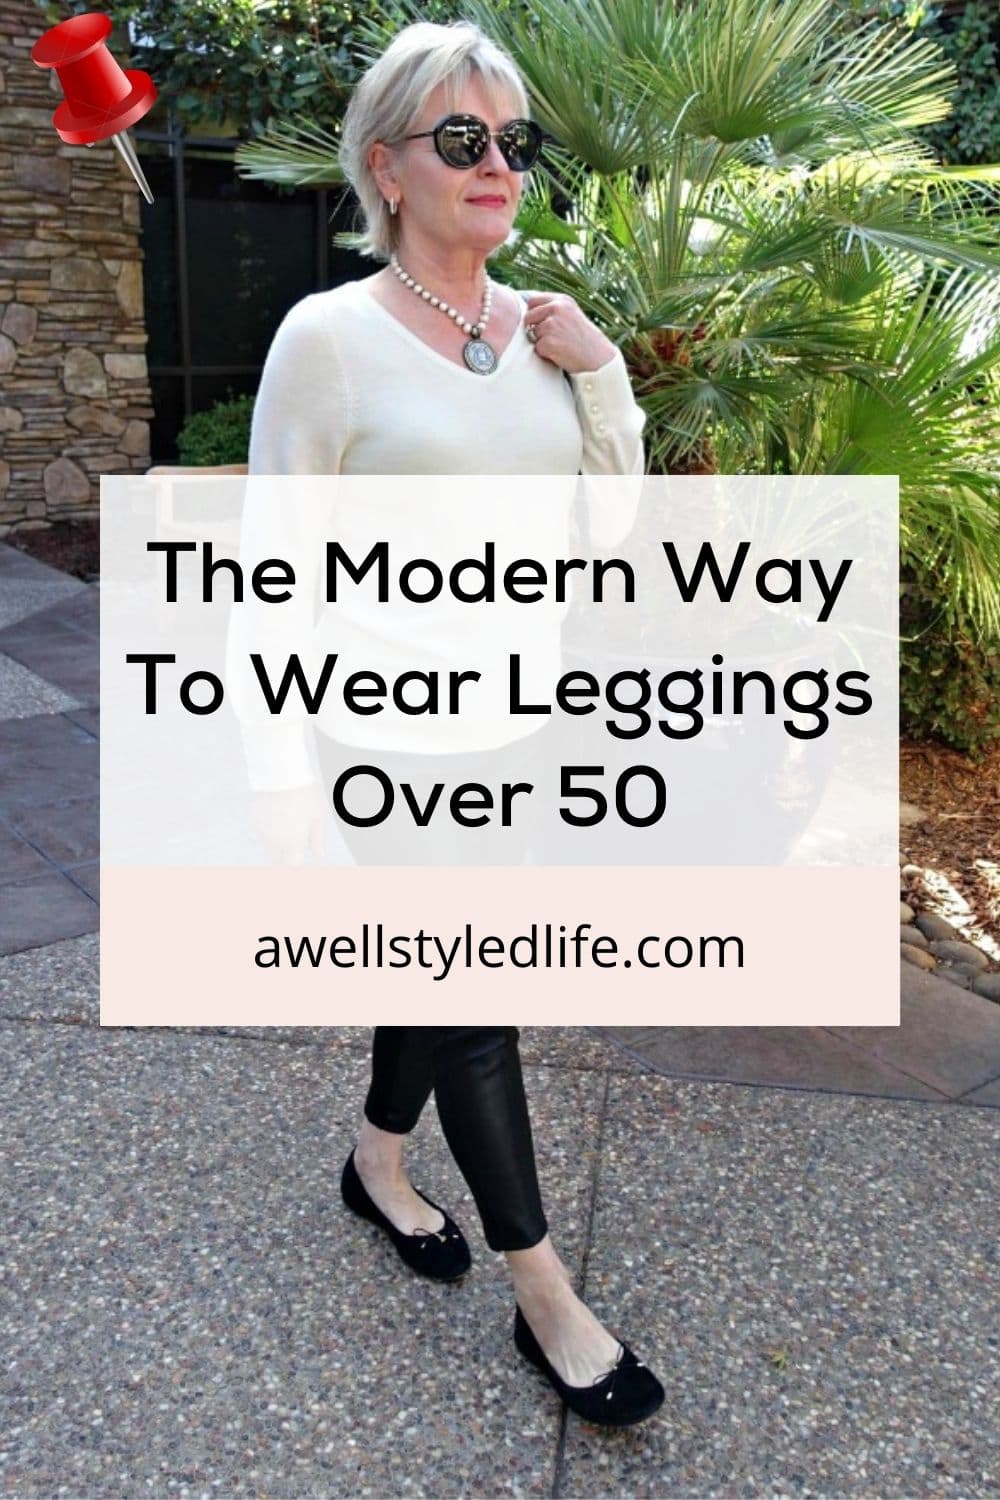 Leggings Are Back! How Women Over 50 Can Rock The Trend